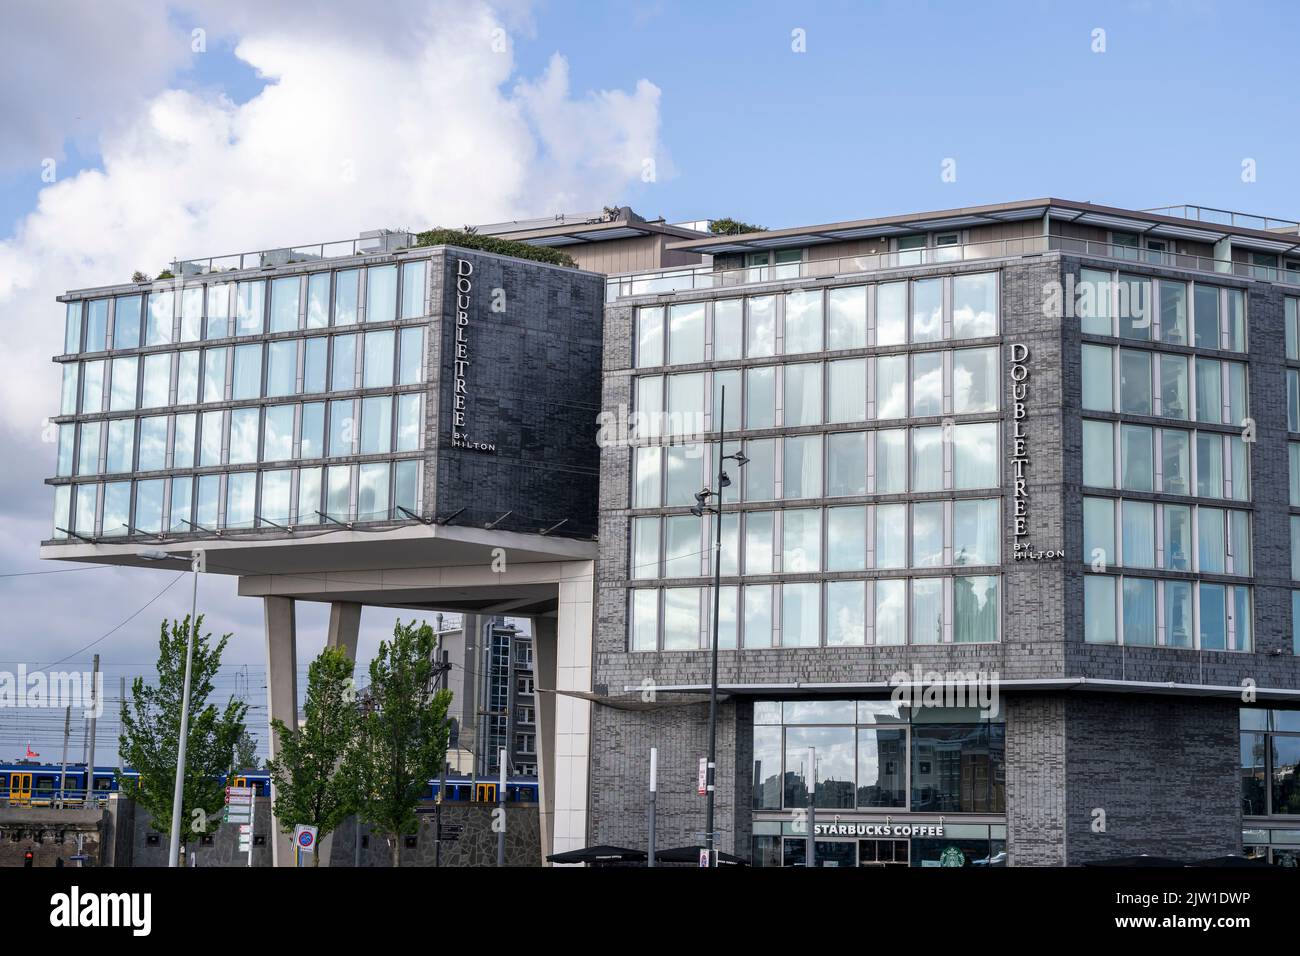 A general view of the Doubletree by Hilton hotel in Amsterdam, Holland. Stock Photo